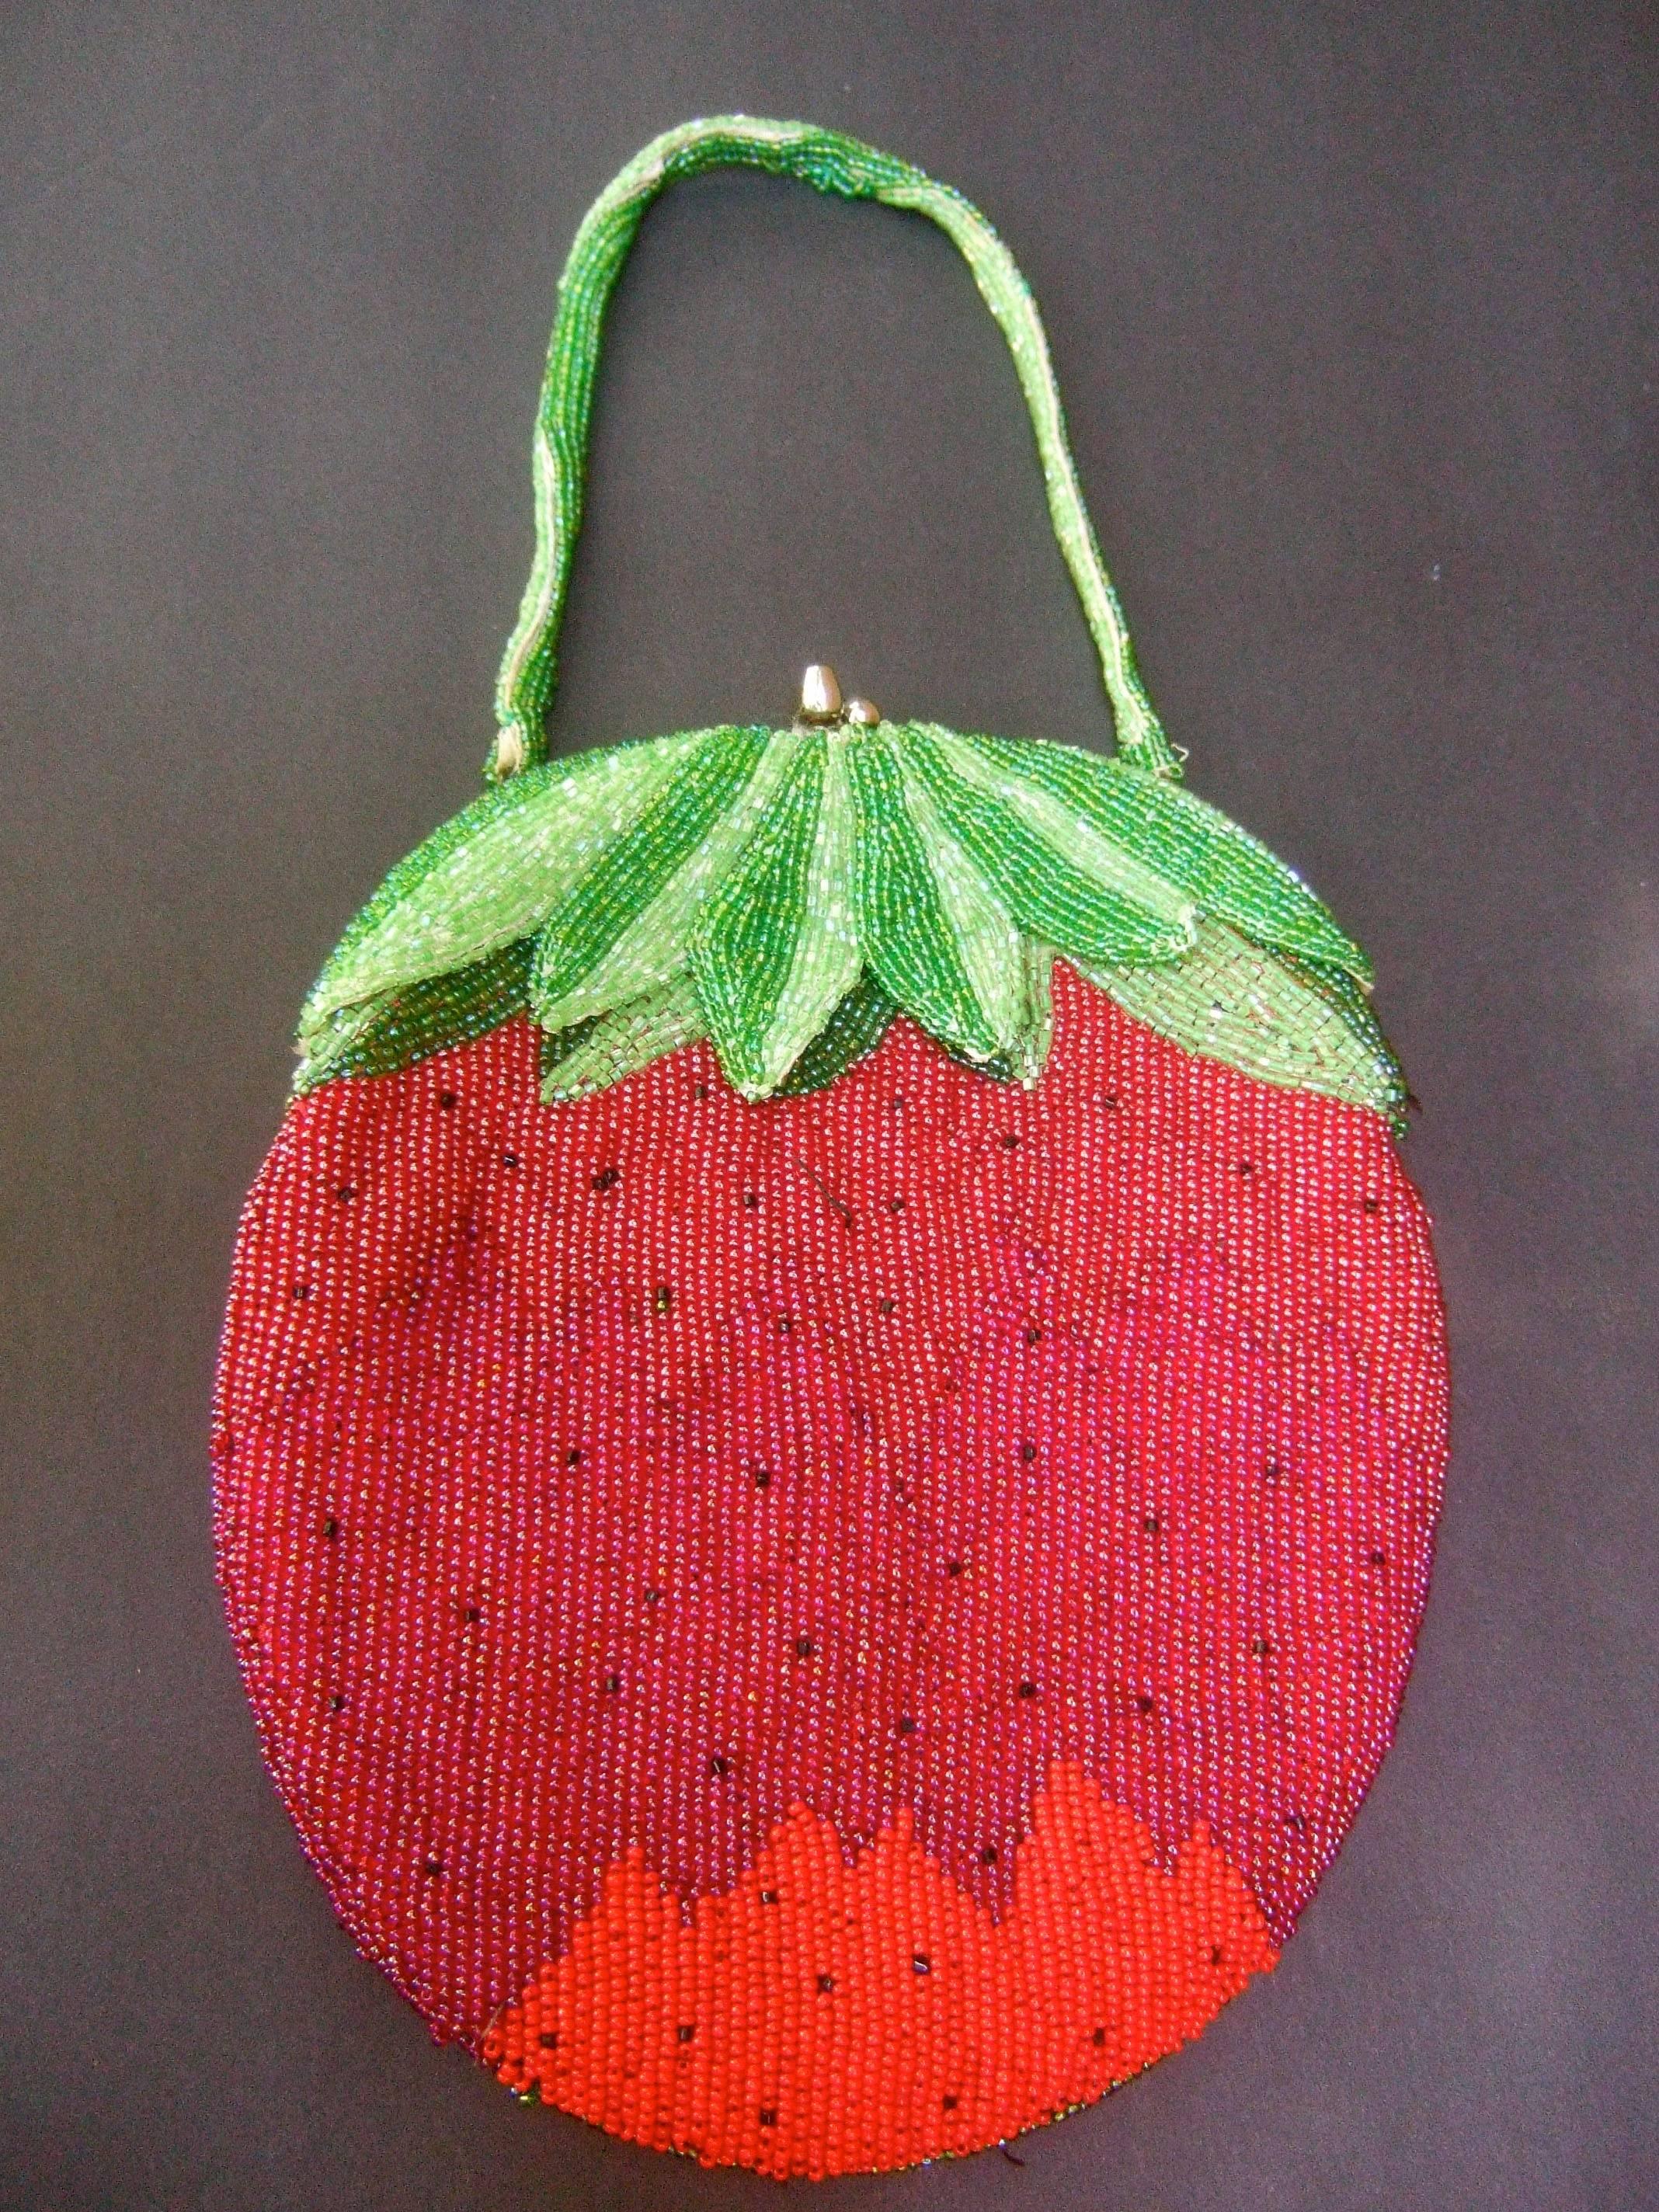 Whimsical glass beaded strawberry evening bag c 1970s
The unique glass beaded purse is designed with rows
of intricate glass beading throughout

Suspended from a matching green glass beaded handle 
The interior is lined in red satin designed with a